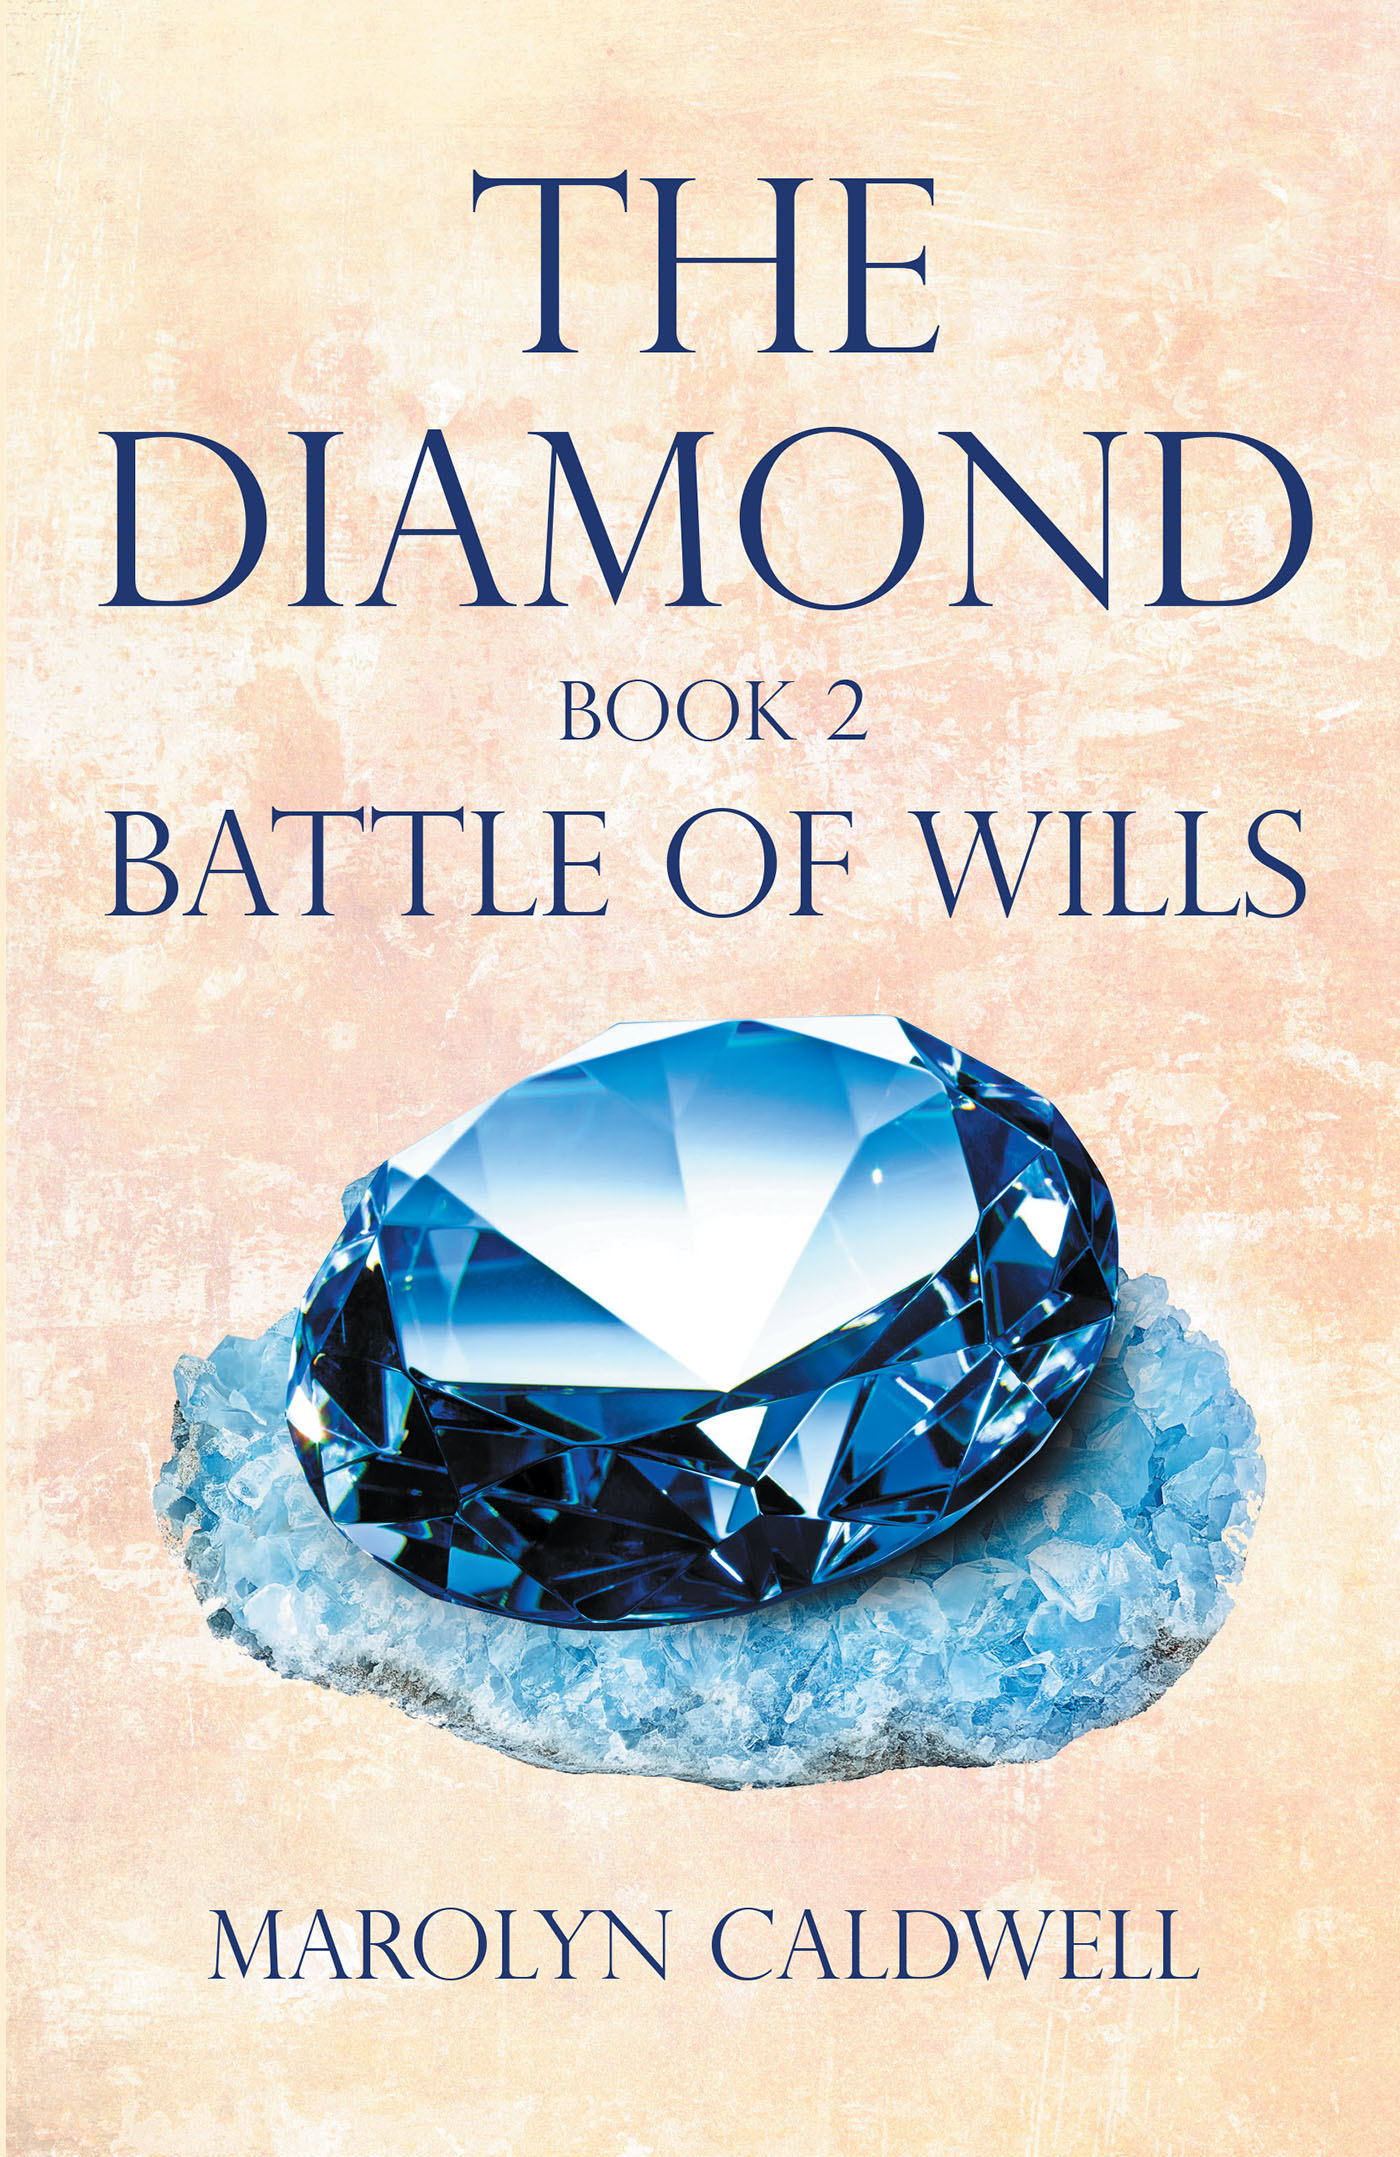 Author Marolyn Caldwell’s New Book, "The Diamond: Book 2 of Battle of Wills Series," is the Compelling Continuation of This Adventure-Filled Series